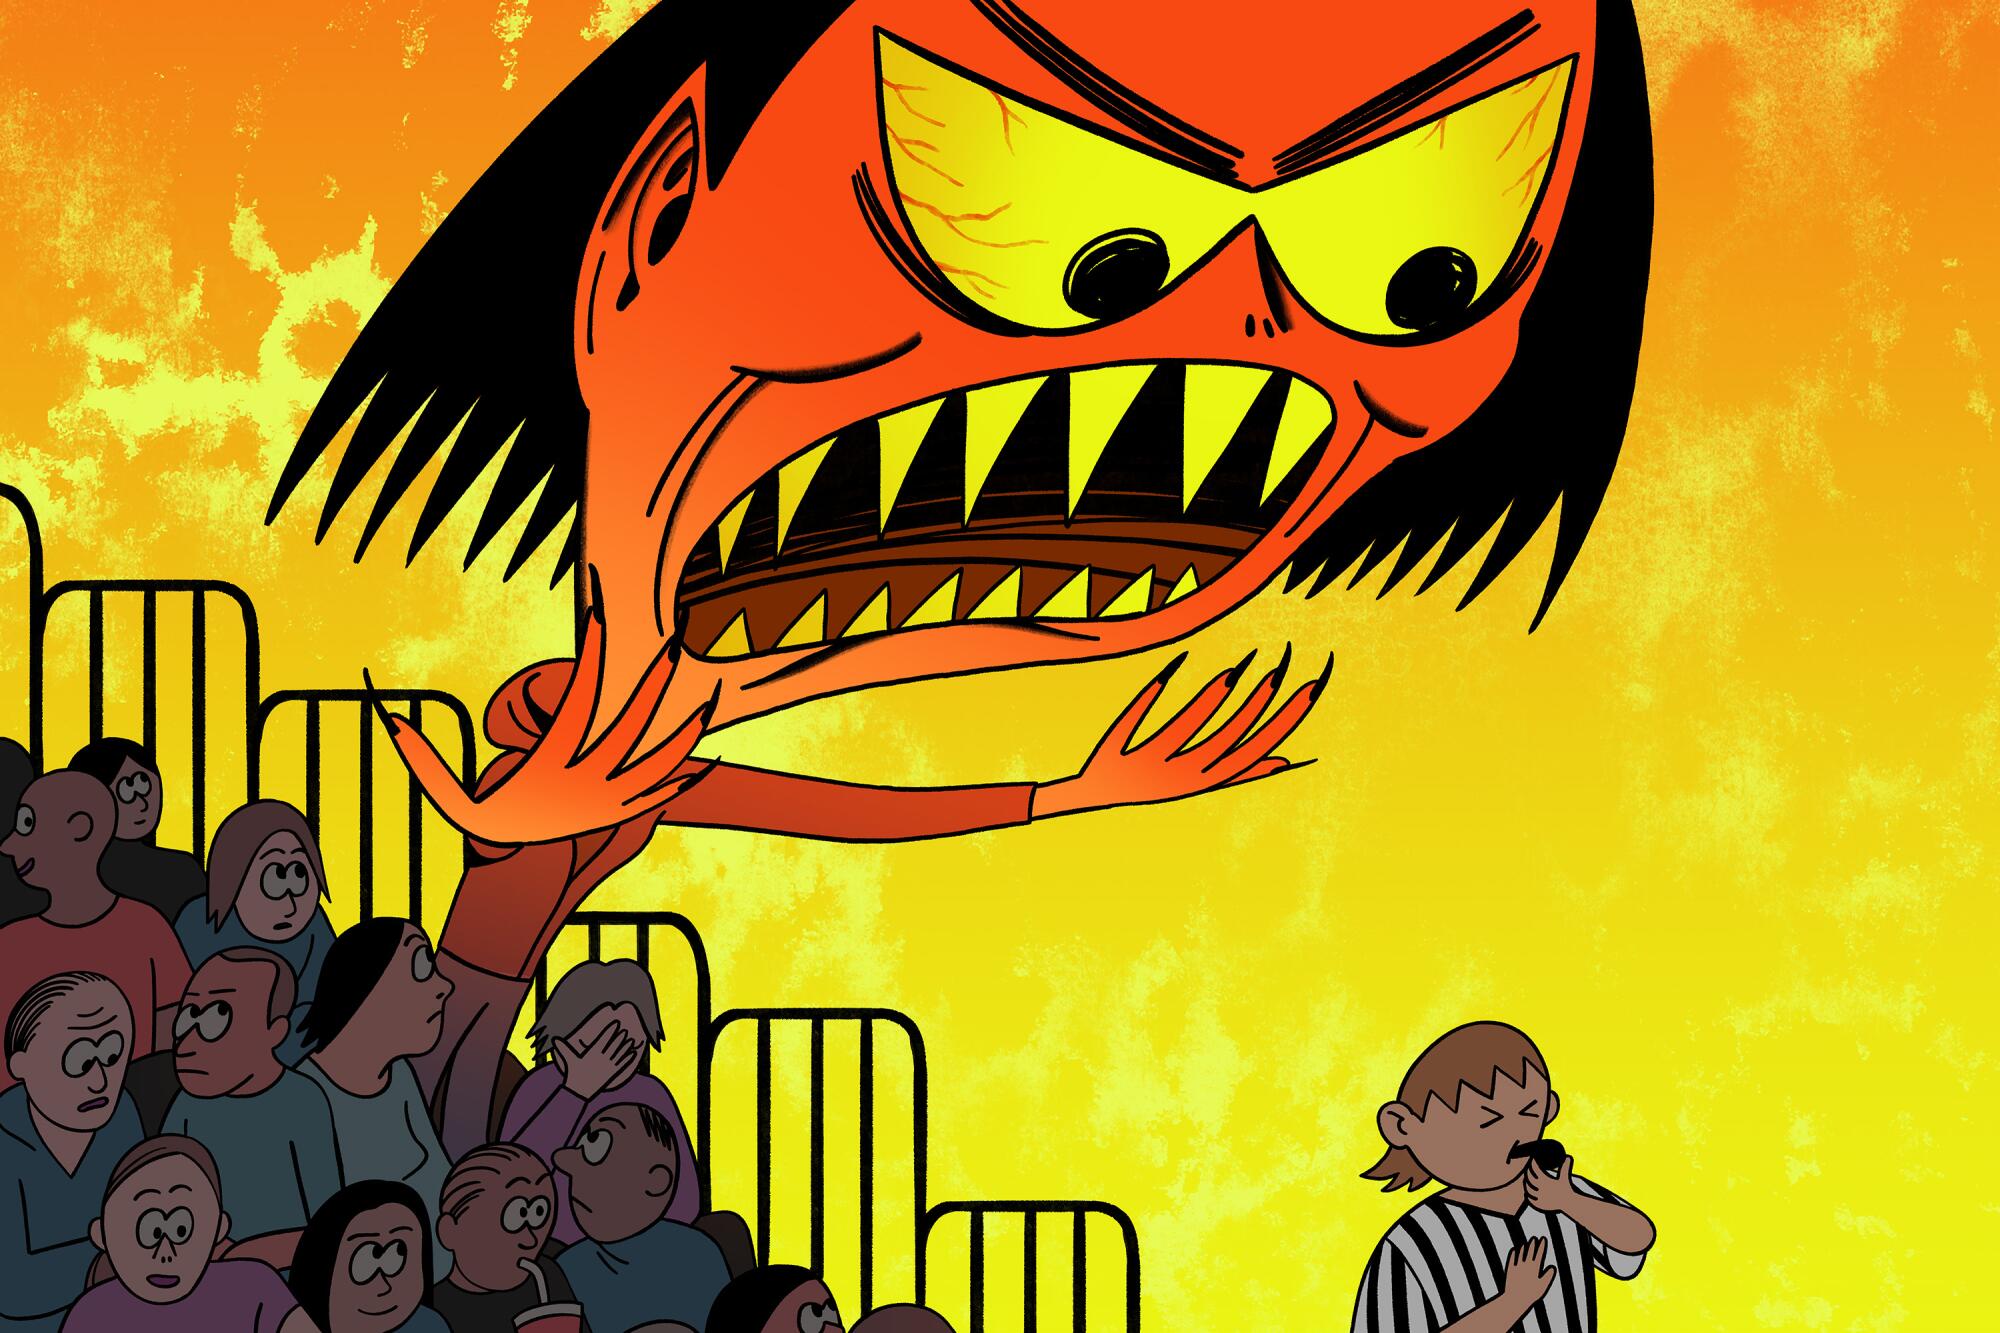 Illustration of a large, jagged-toothed angry cartoon woman yelling at a basketball ref from gymnasium bleachers.